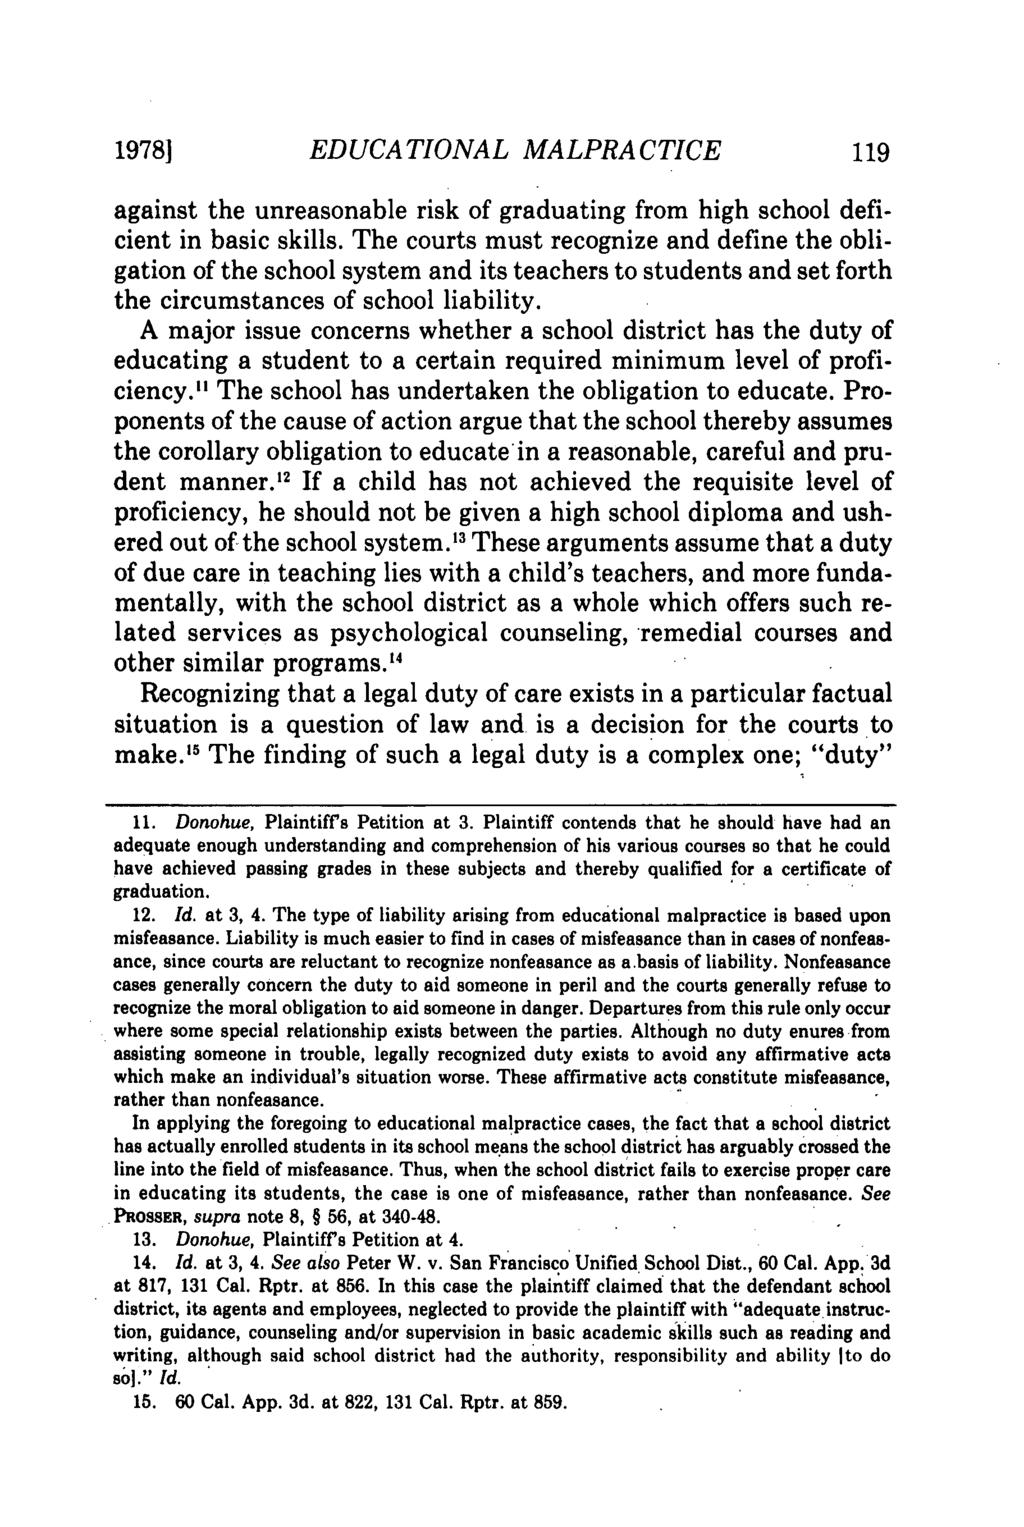 1978] EDUCATIONAL MALPRACTICE against the unreasonable risk of graduating from high school deficient in basic skills.